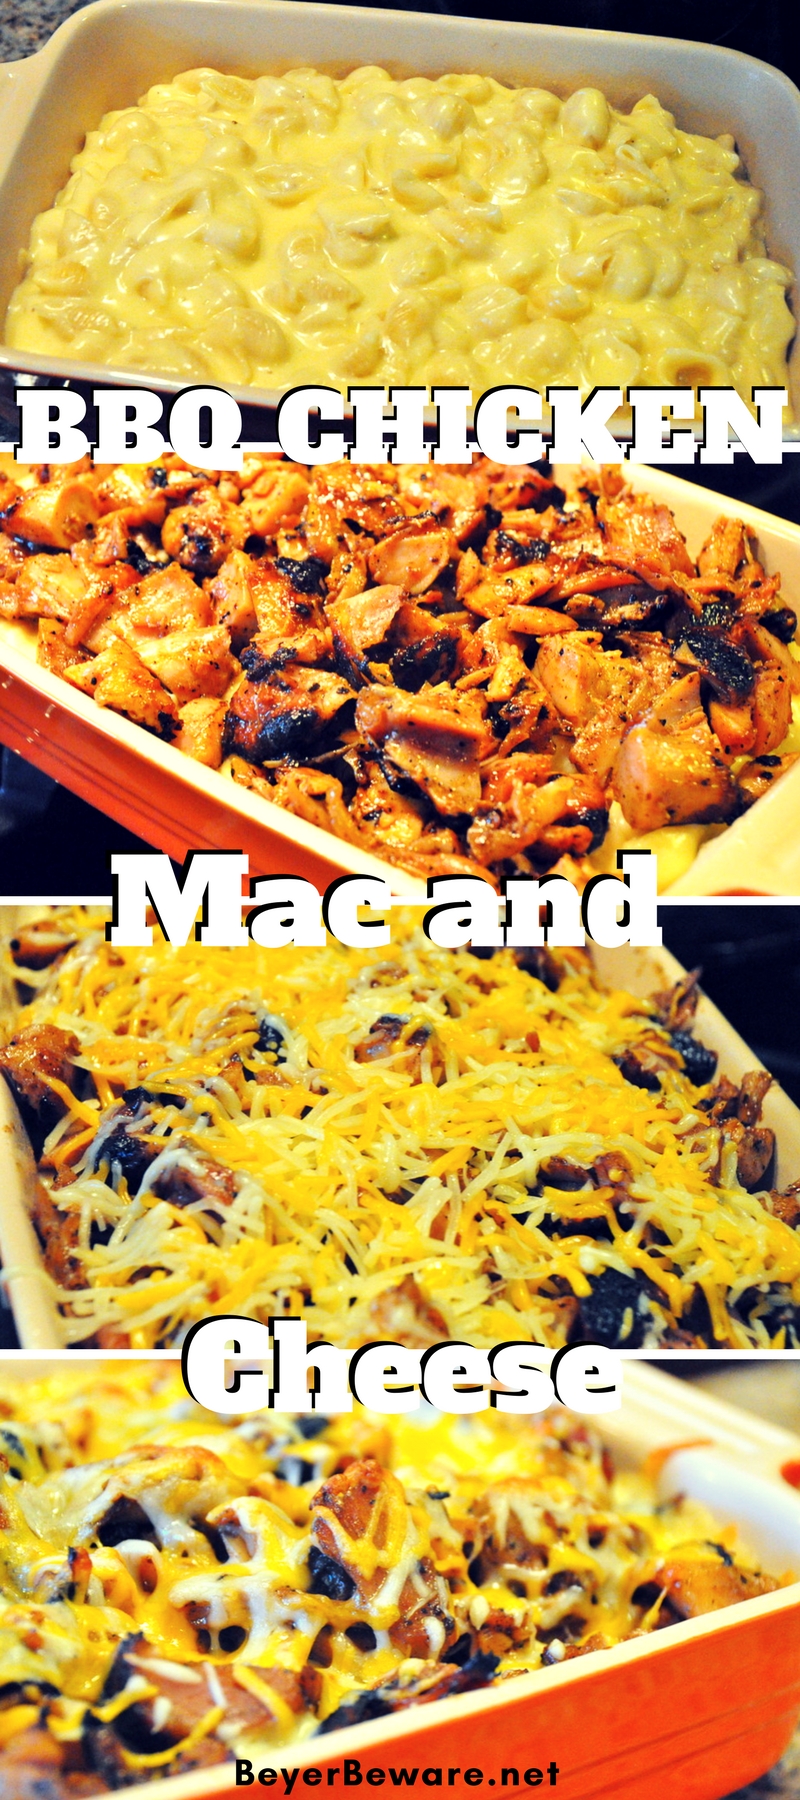 BBQ chicken mac and cheese is a great way to use leftover grilled BBQ chicken with cheesy macaroni for a quick go-to weeknight meal.